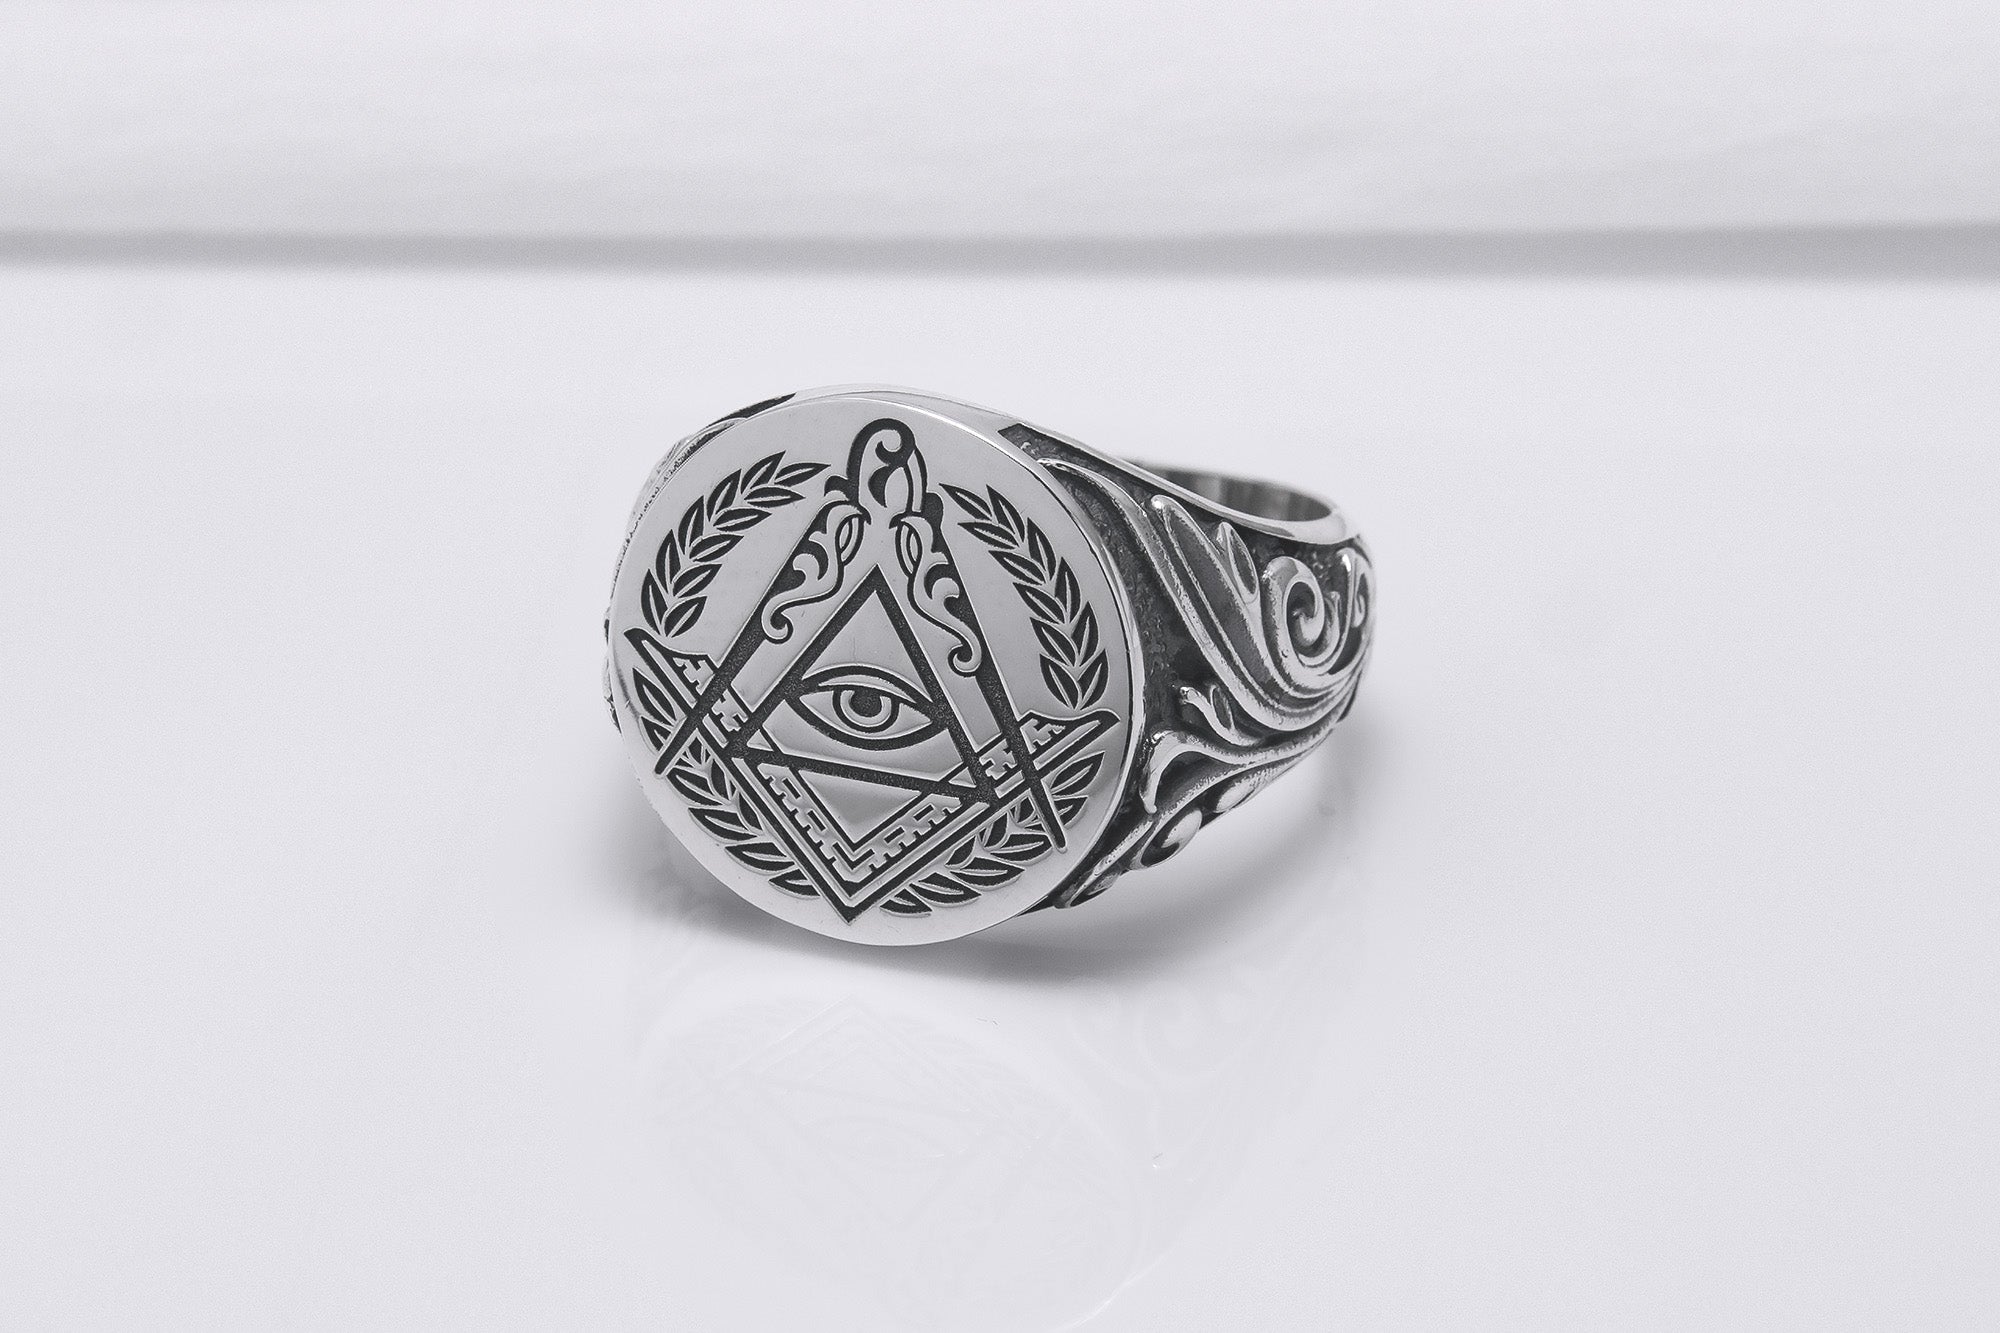 Sterling Silver Masonic Square and Compasses Signet Ring, Handmade Mason Jewelry